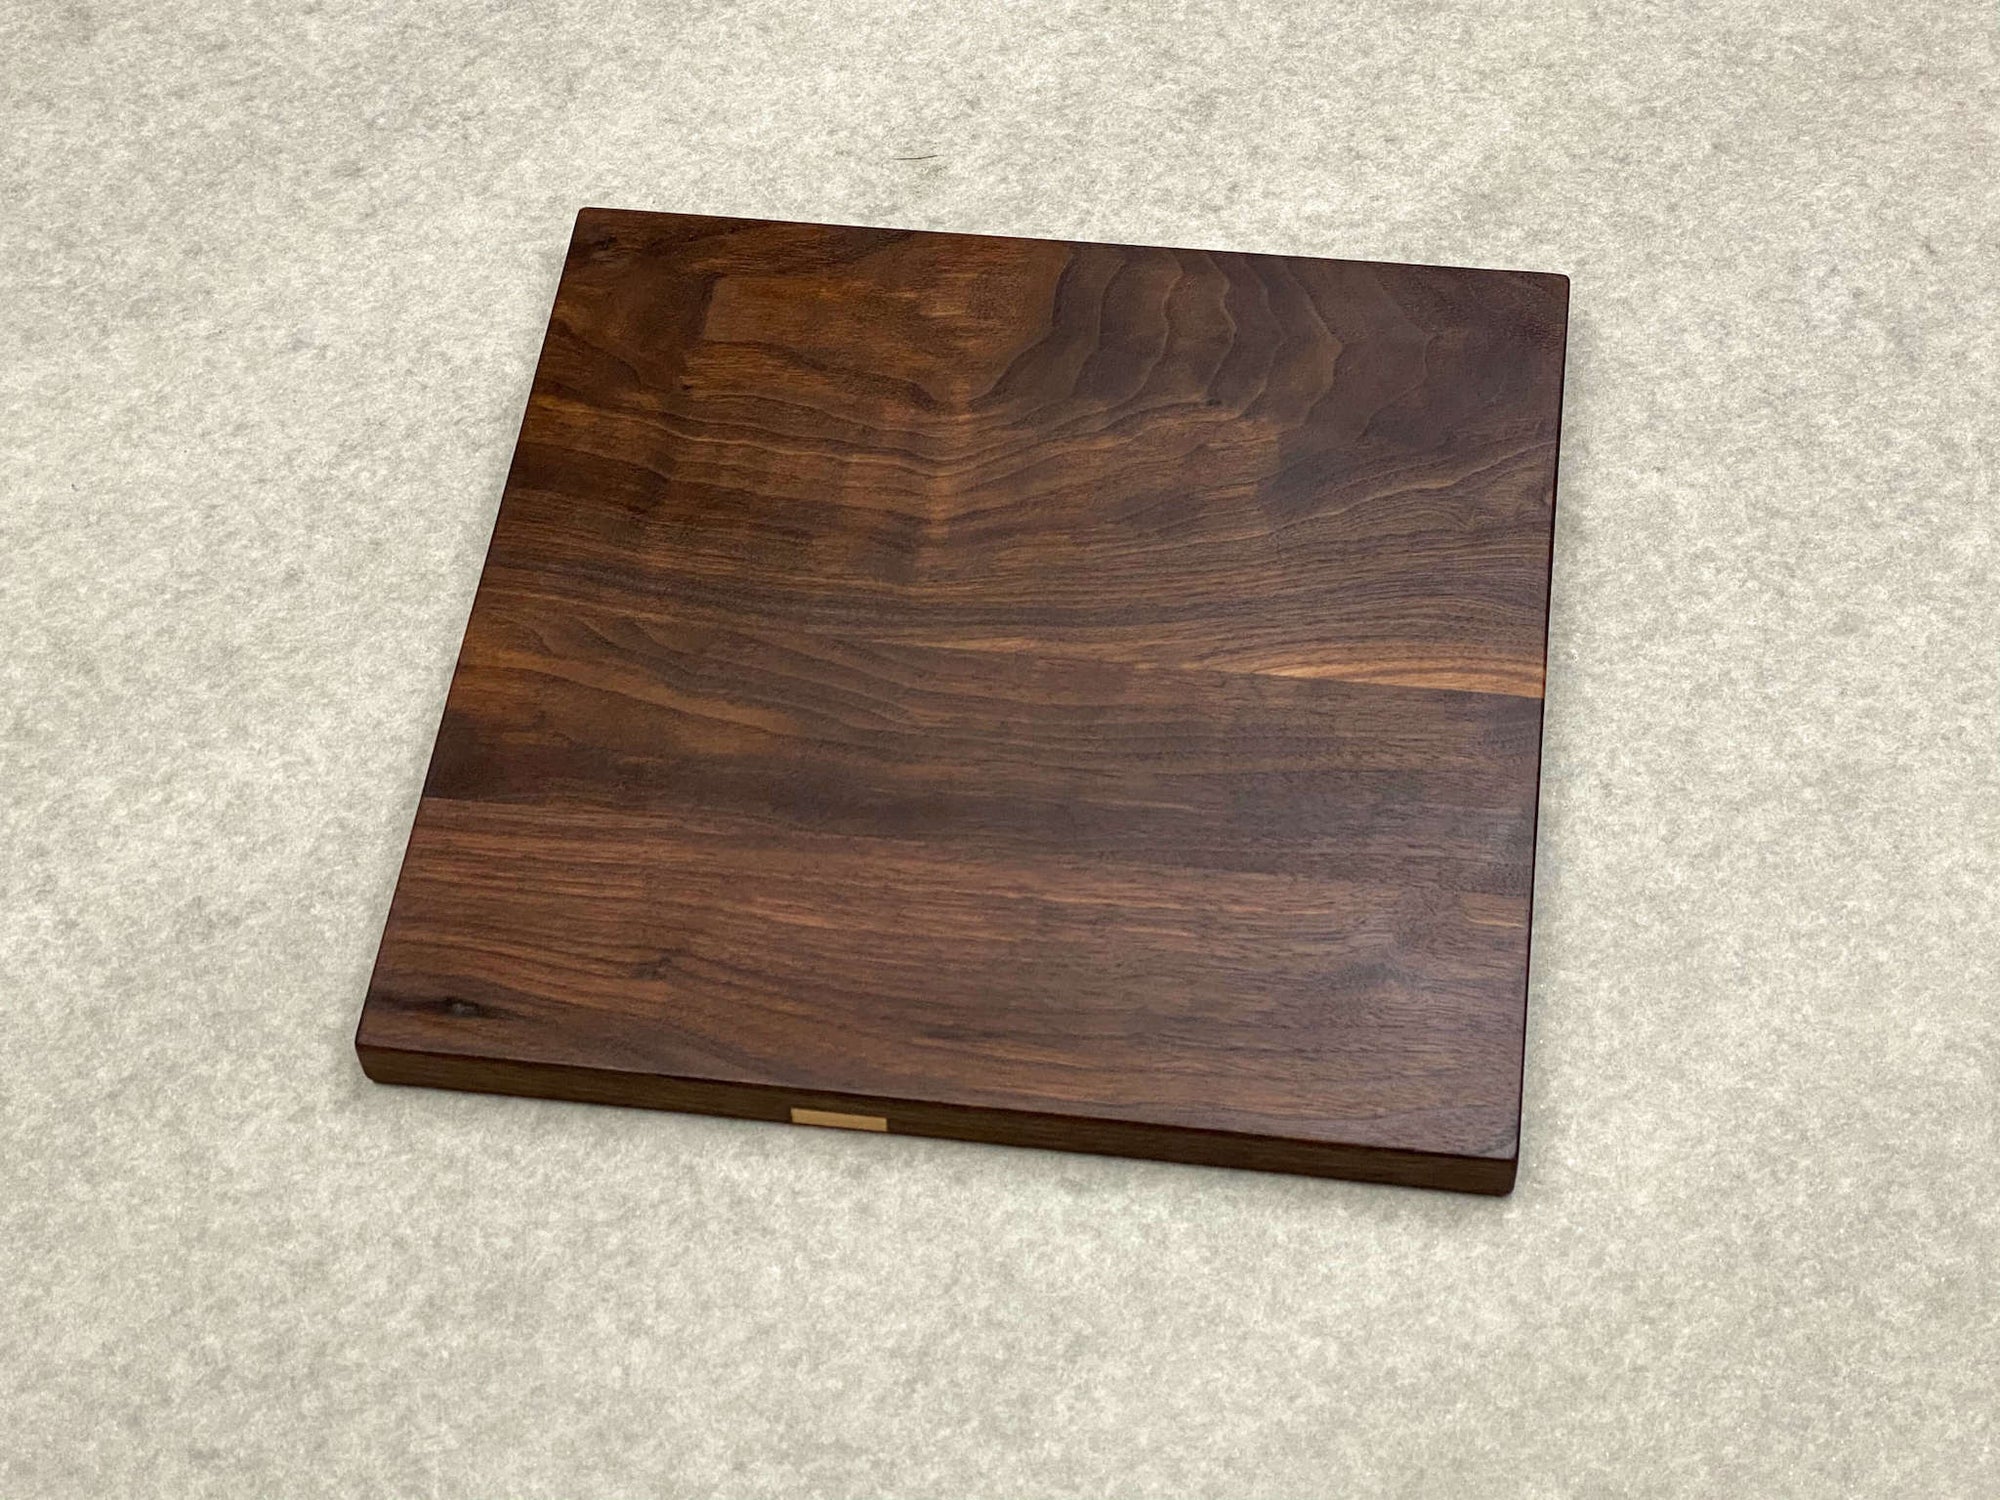 Square cutting and serving board in walnut with inlaid maple dots.